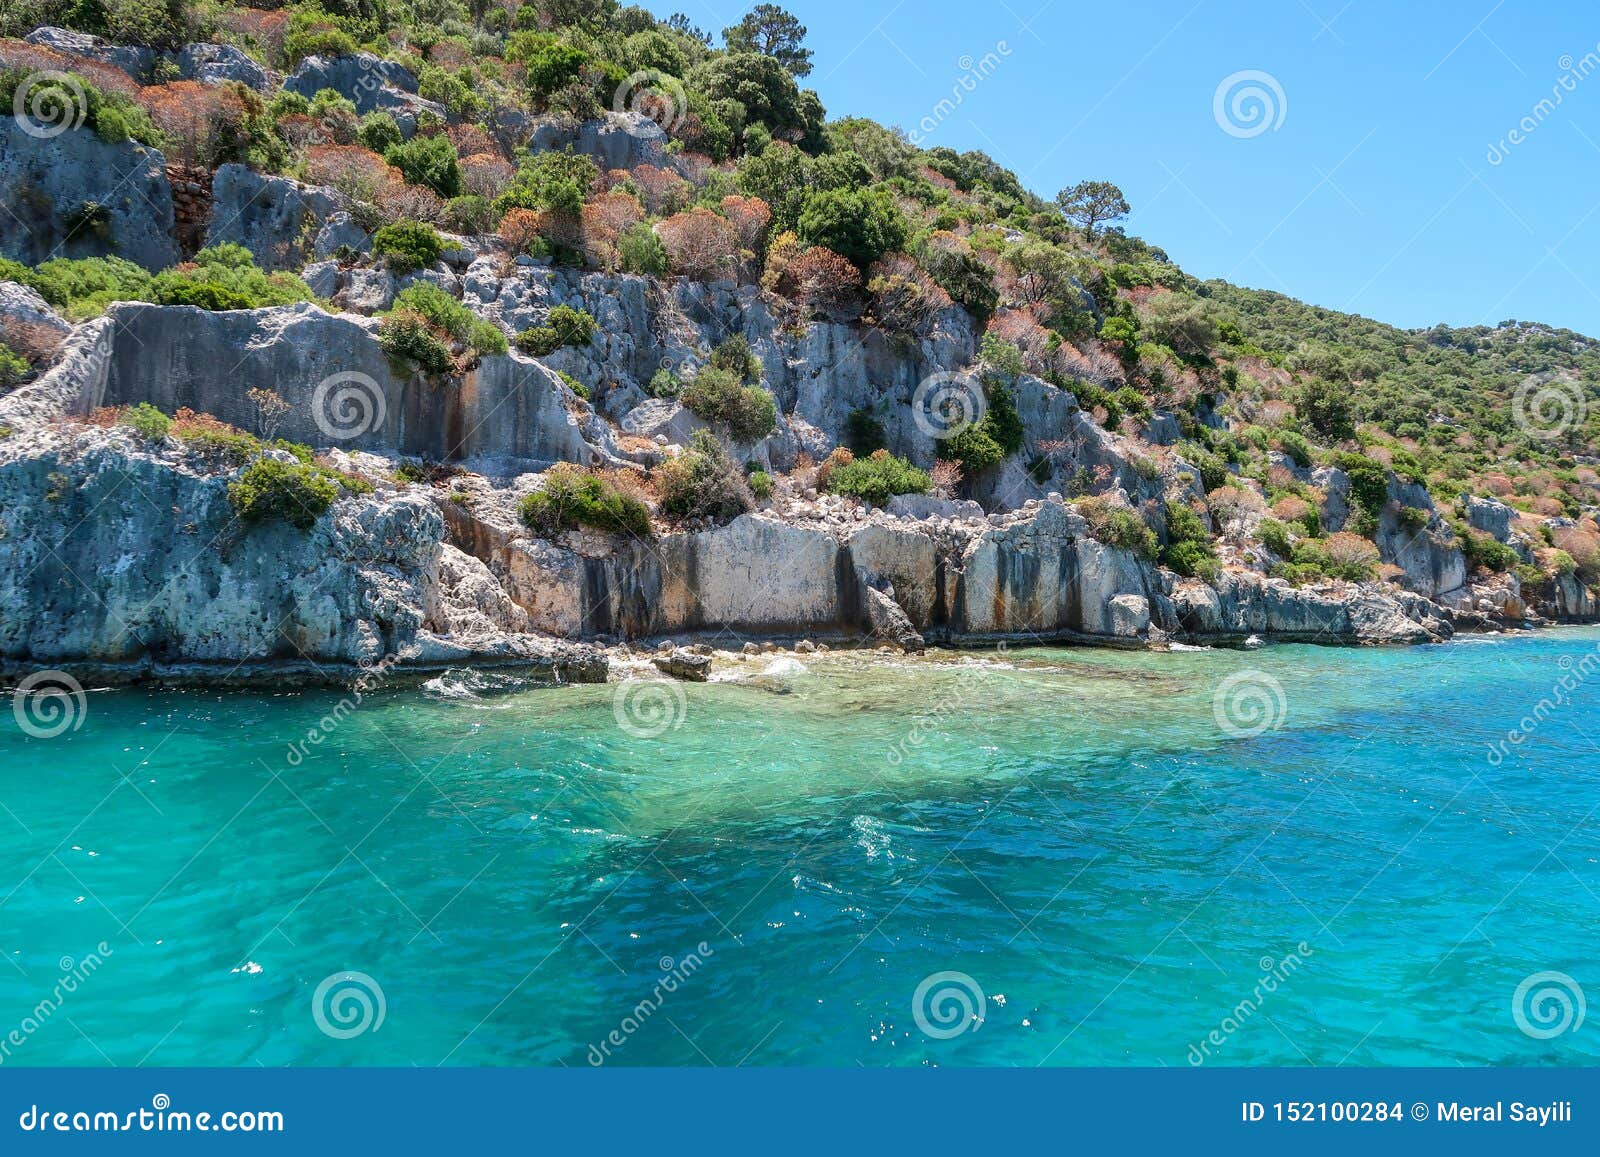 kekova where sunken shipwrecks of dolkisthe antique city which was destroyed by earthquakes in the 2nd century, tukey